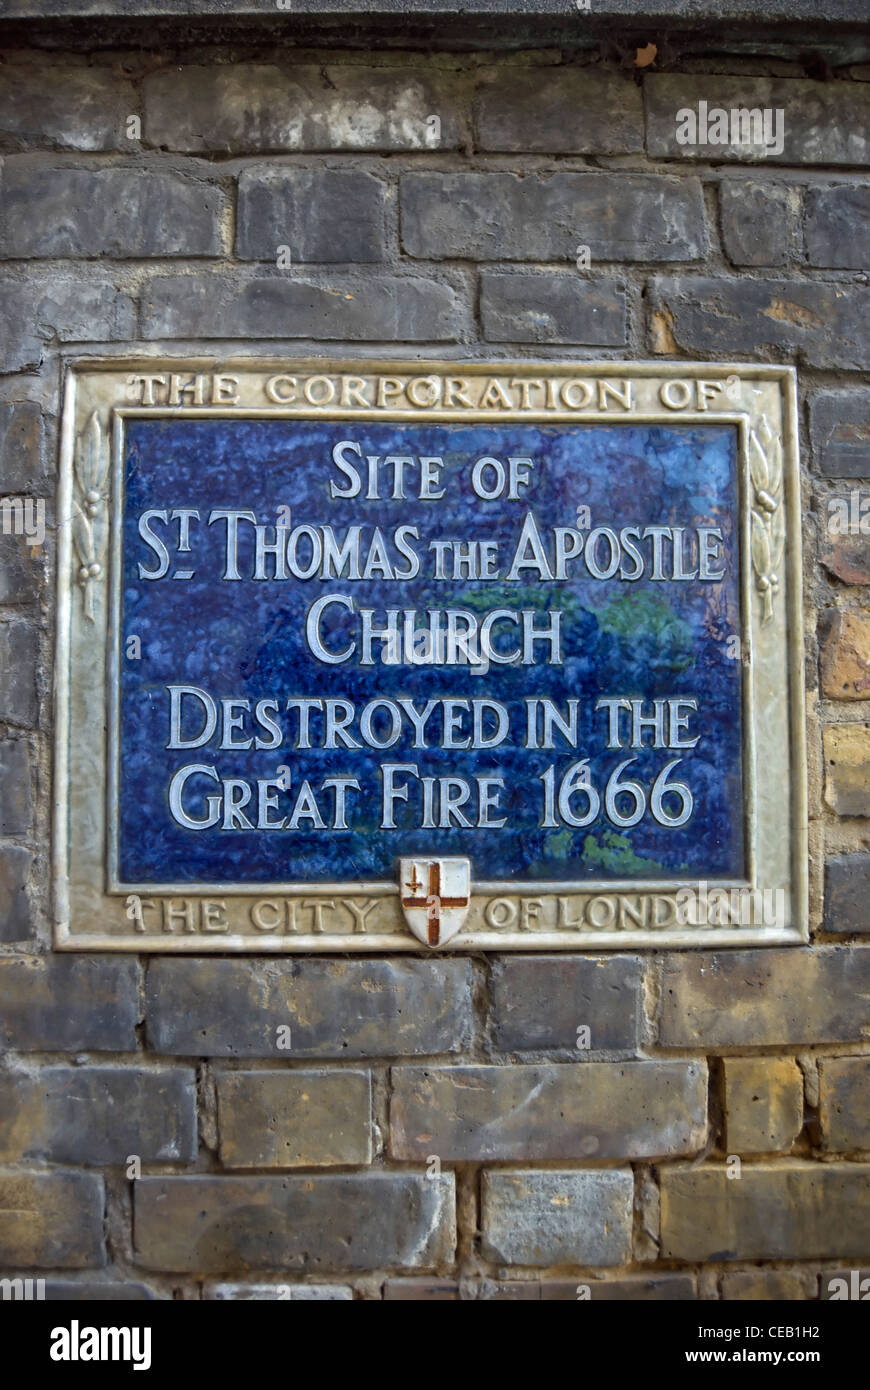 city of london blue plaque marking the site of st thomas the apostle church, destroyed by the 1666 great fire, london, england Stock Photo